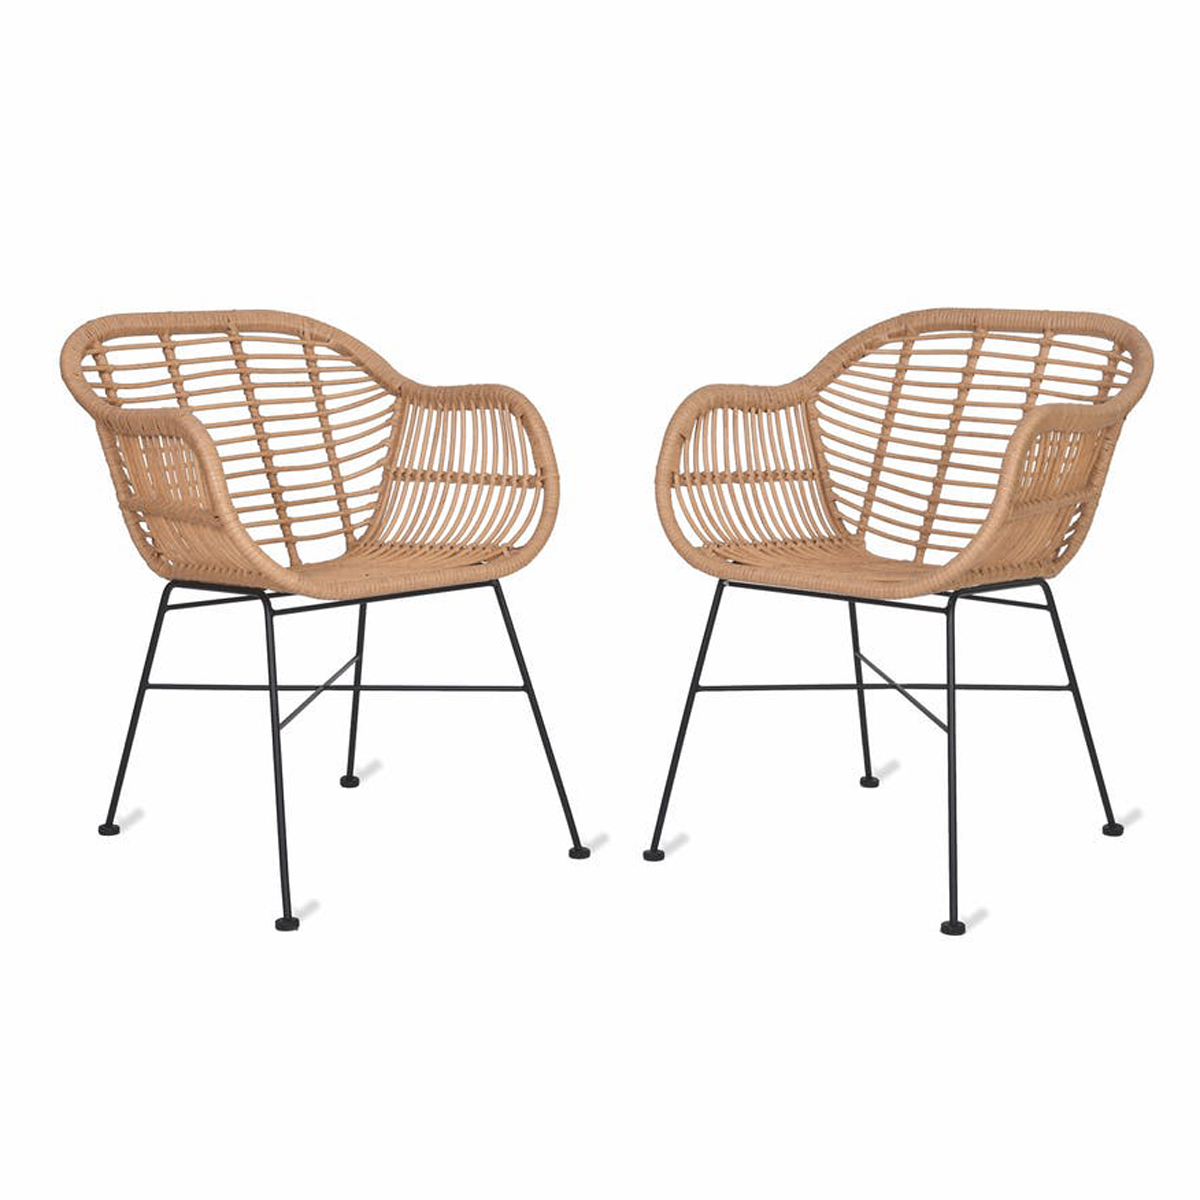 Pair Weatherproof Bamboo Dining Chairs, Is Bamboo Good For Outdoor Furniture